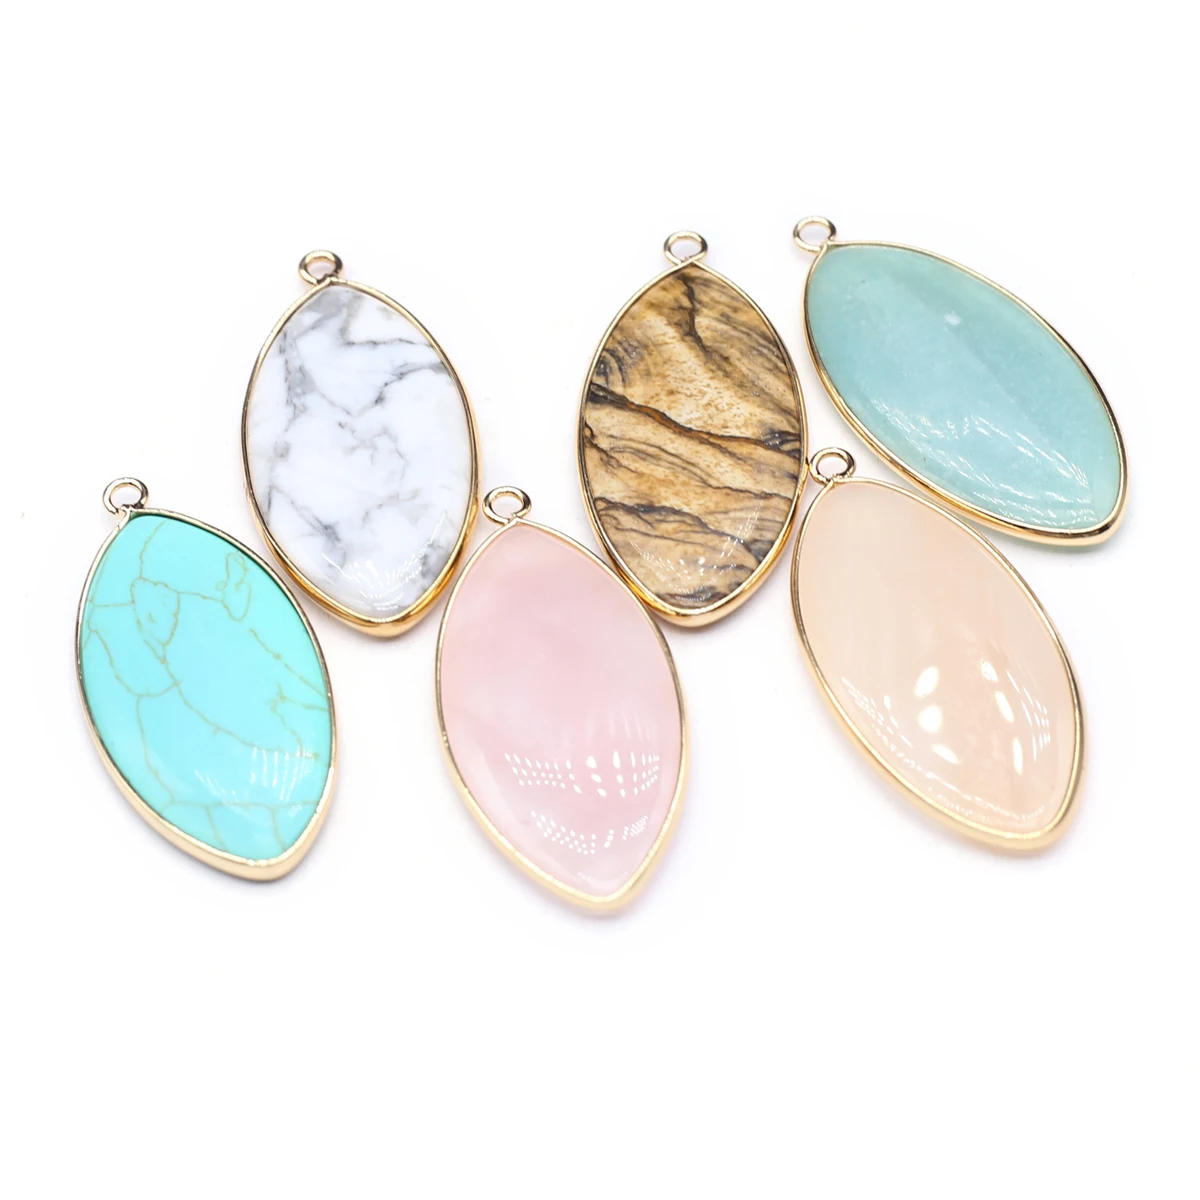 

5 Pcs Marquise Shape Random Healing Crystal Stone Pendants Agate Charms for Making Jewelry Necklace Gift